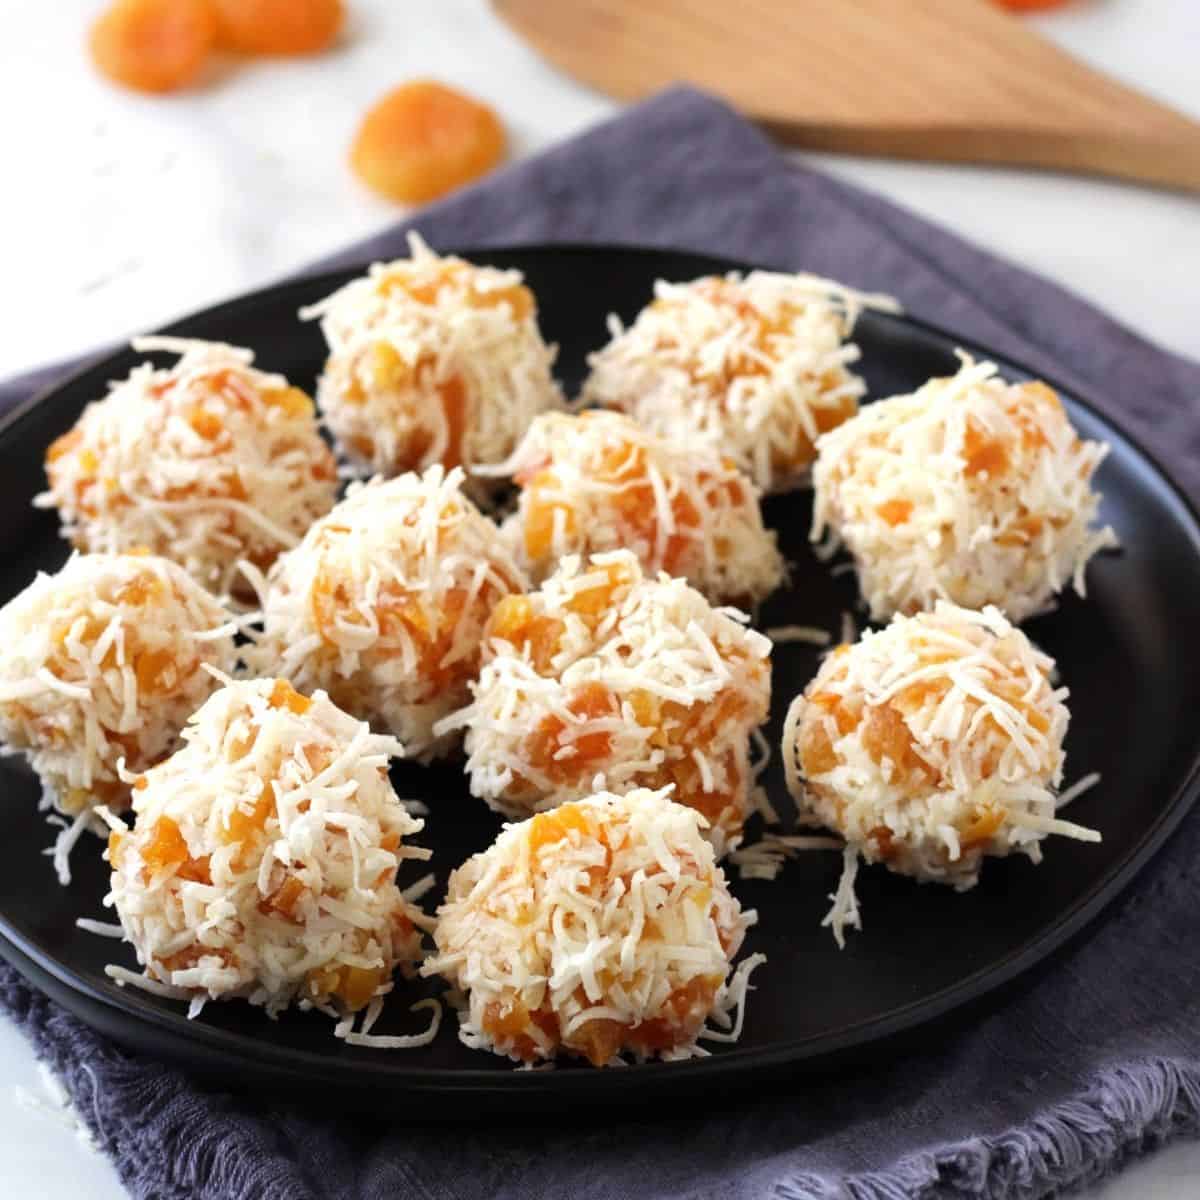 balls of apricot and shredded coconut sit on a black plate.